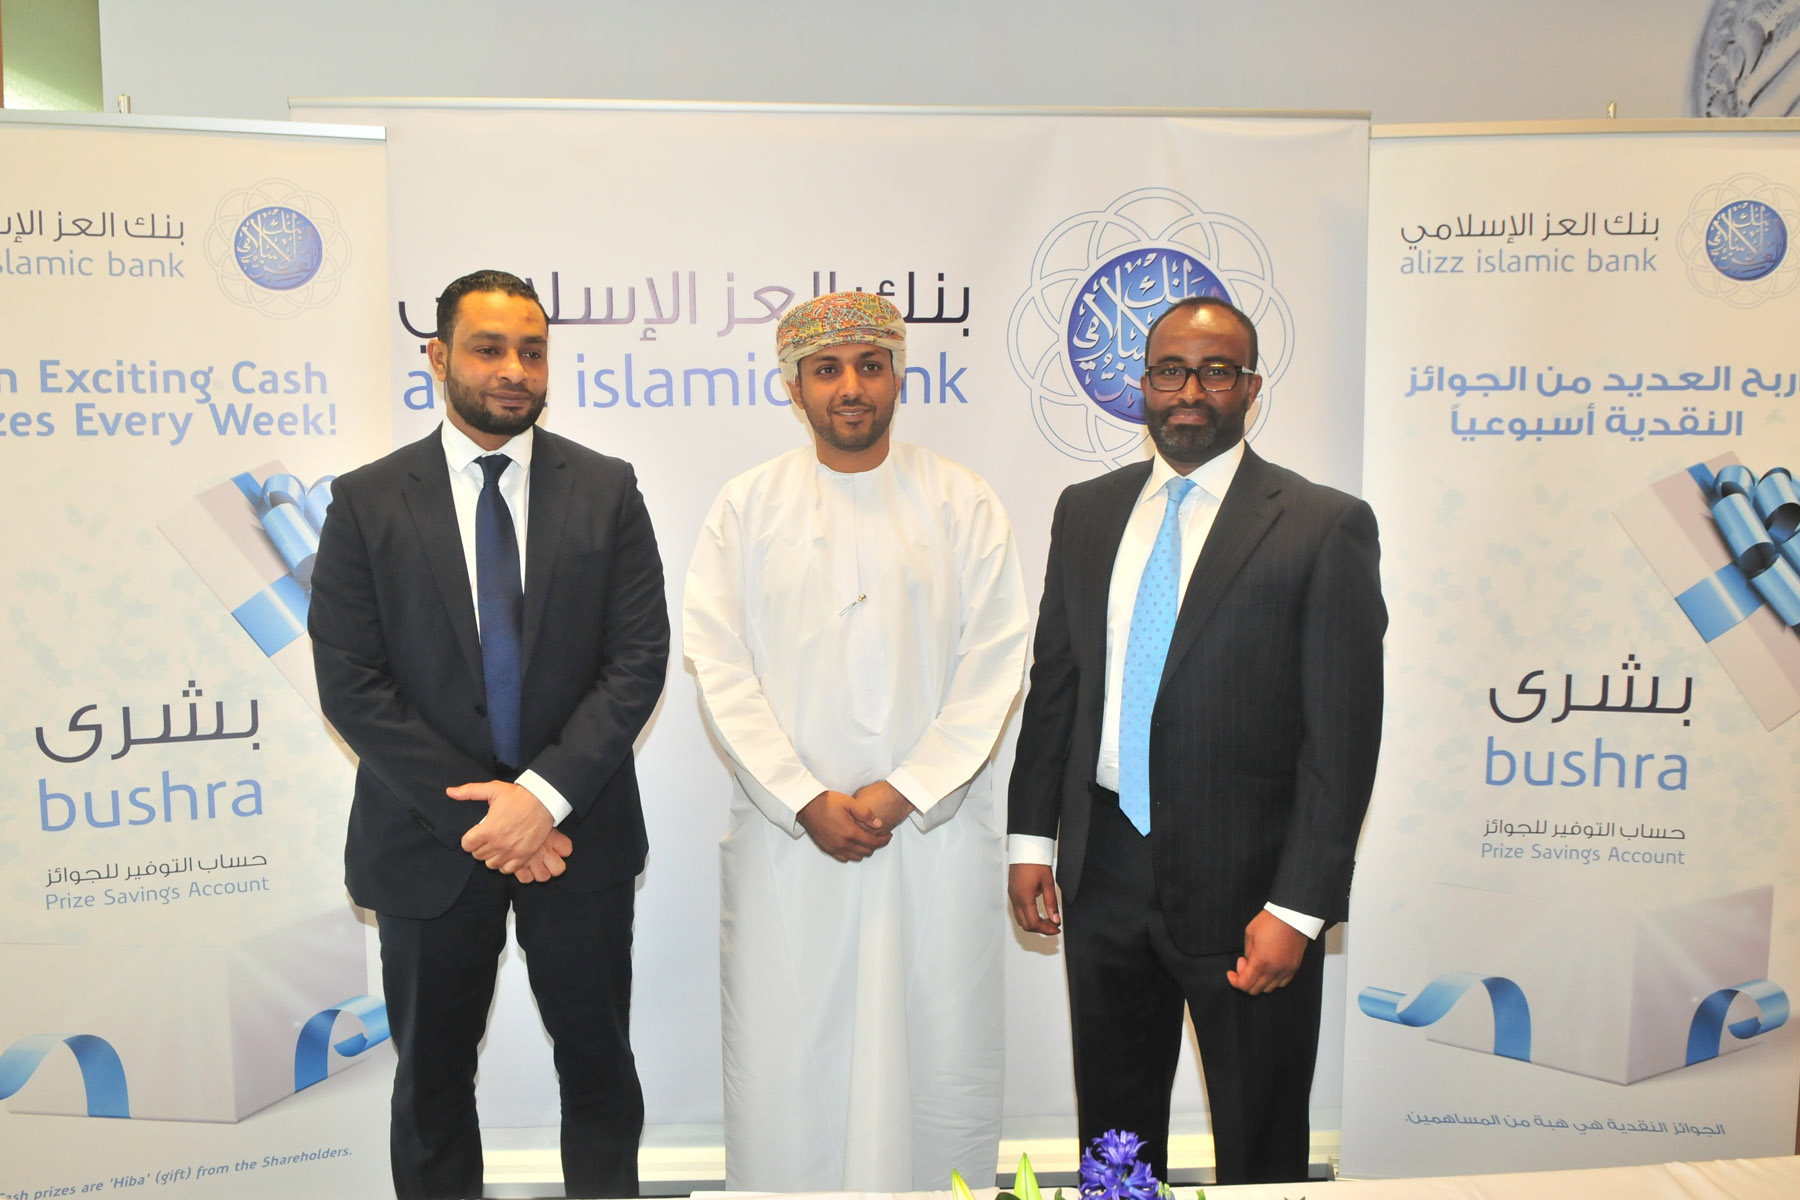 Oman's alizz islamic bank unveils new financial product